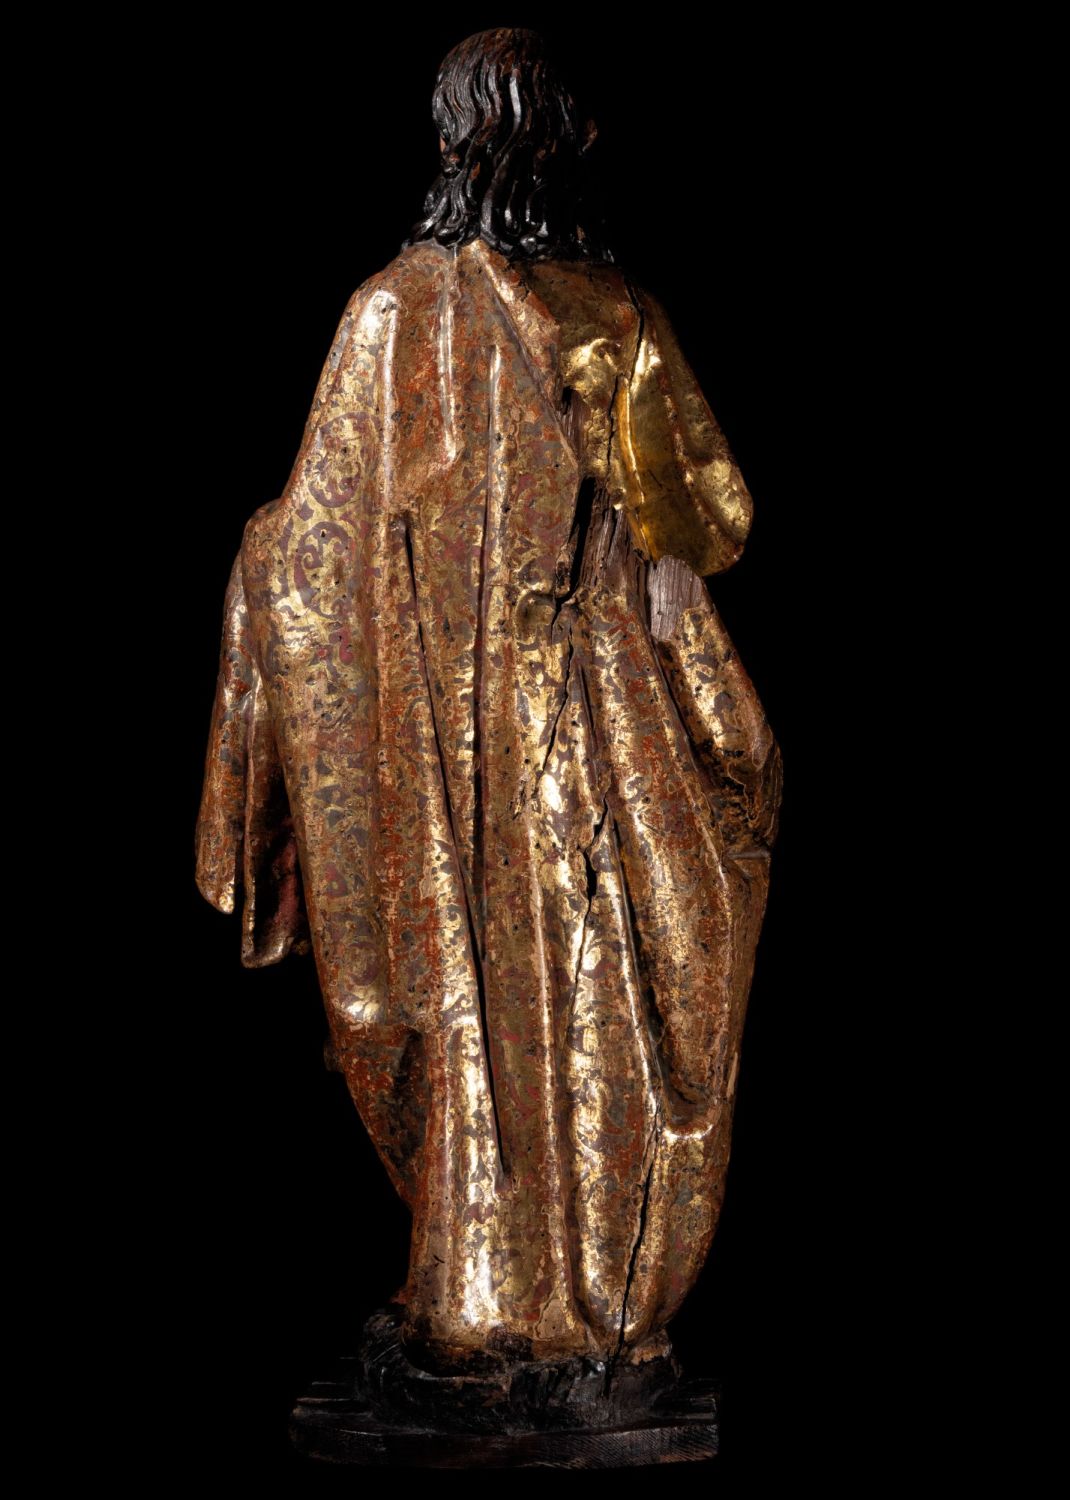 Large Romanist Sculpture of Saint John the Evangelist, Cologne, Southern Germany, 16th century - Image 4 of 4